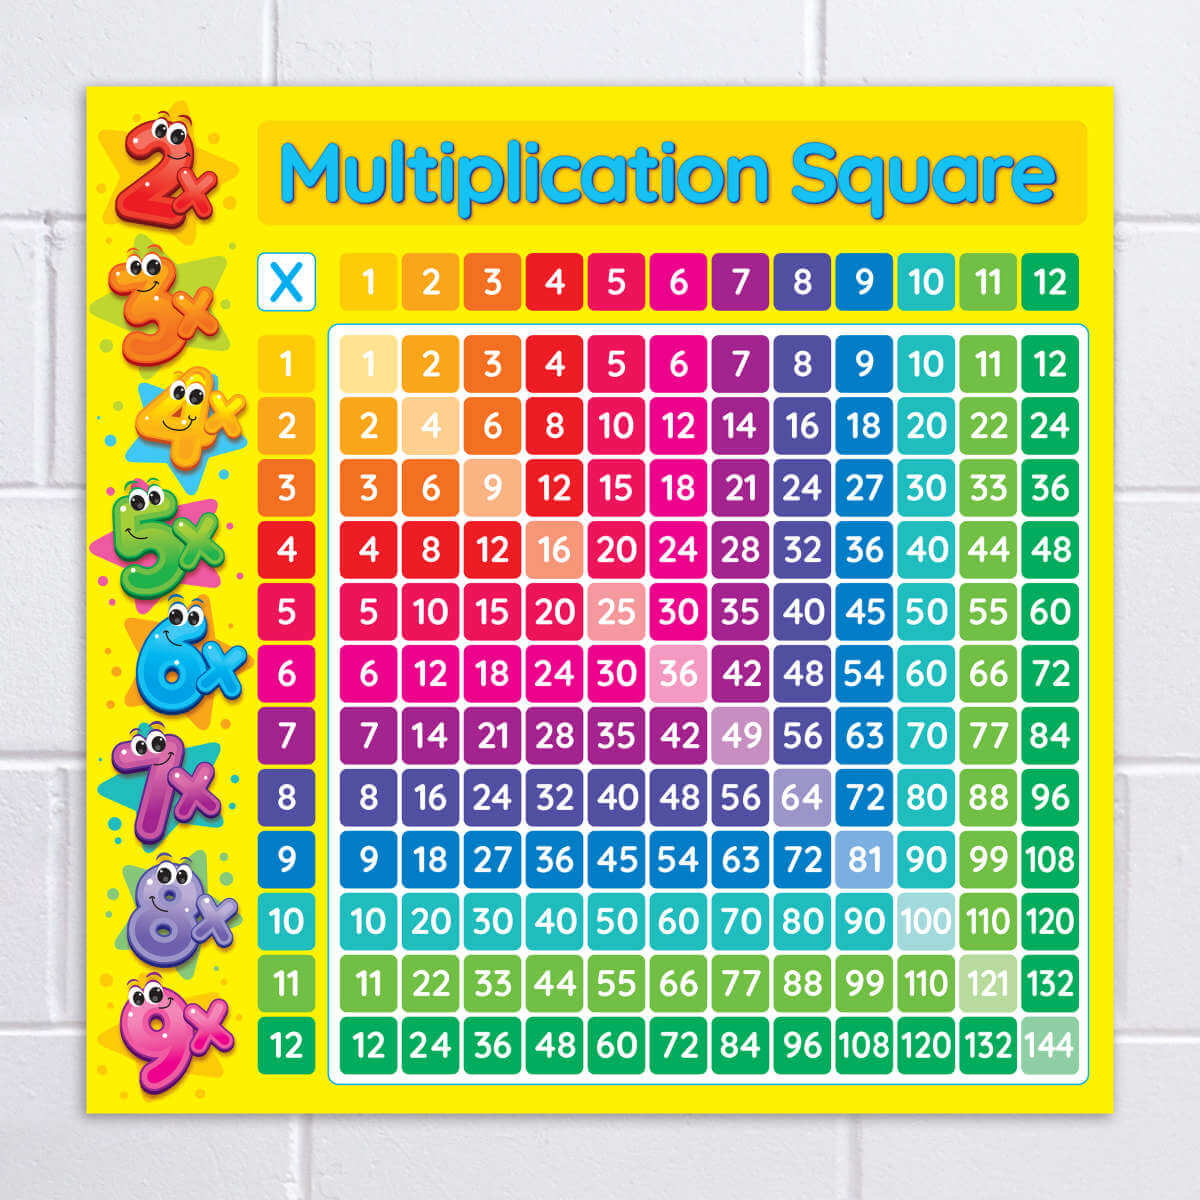 Multiplication Square Poster - Maths Poster for School classrooms